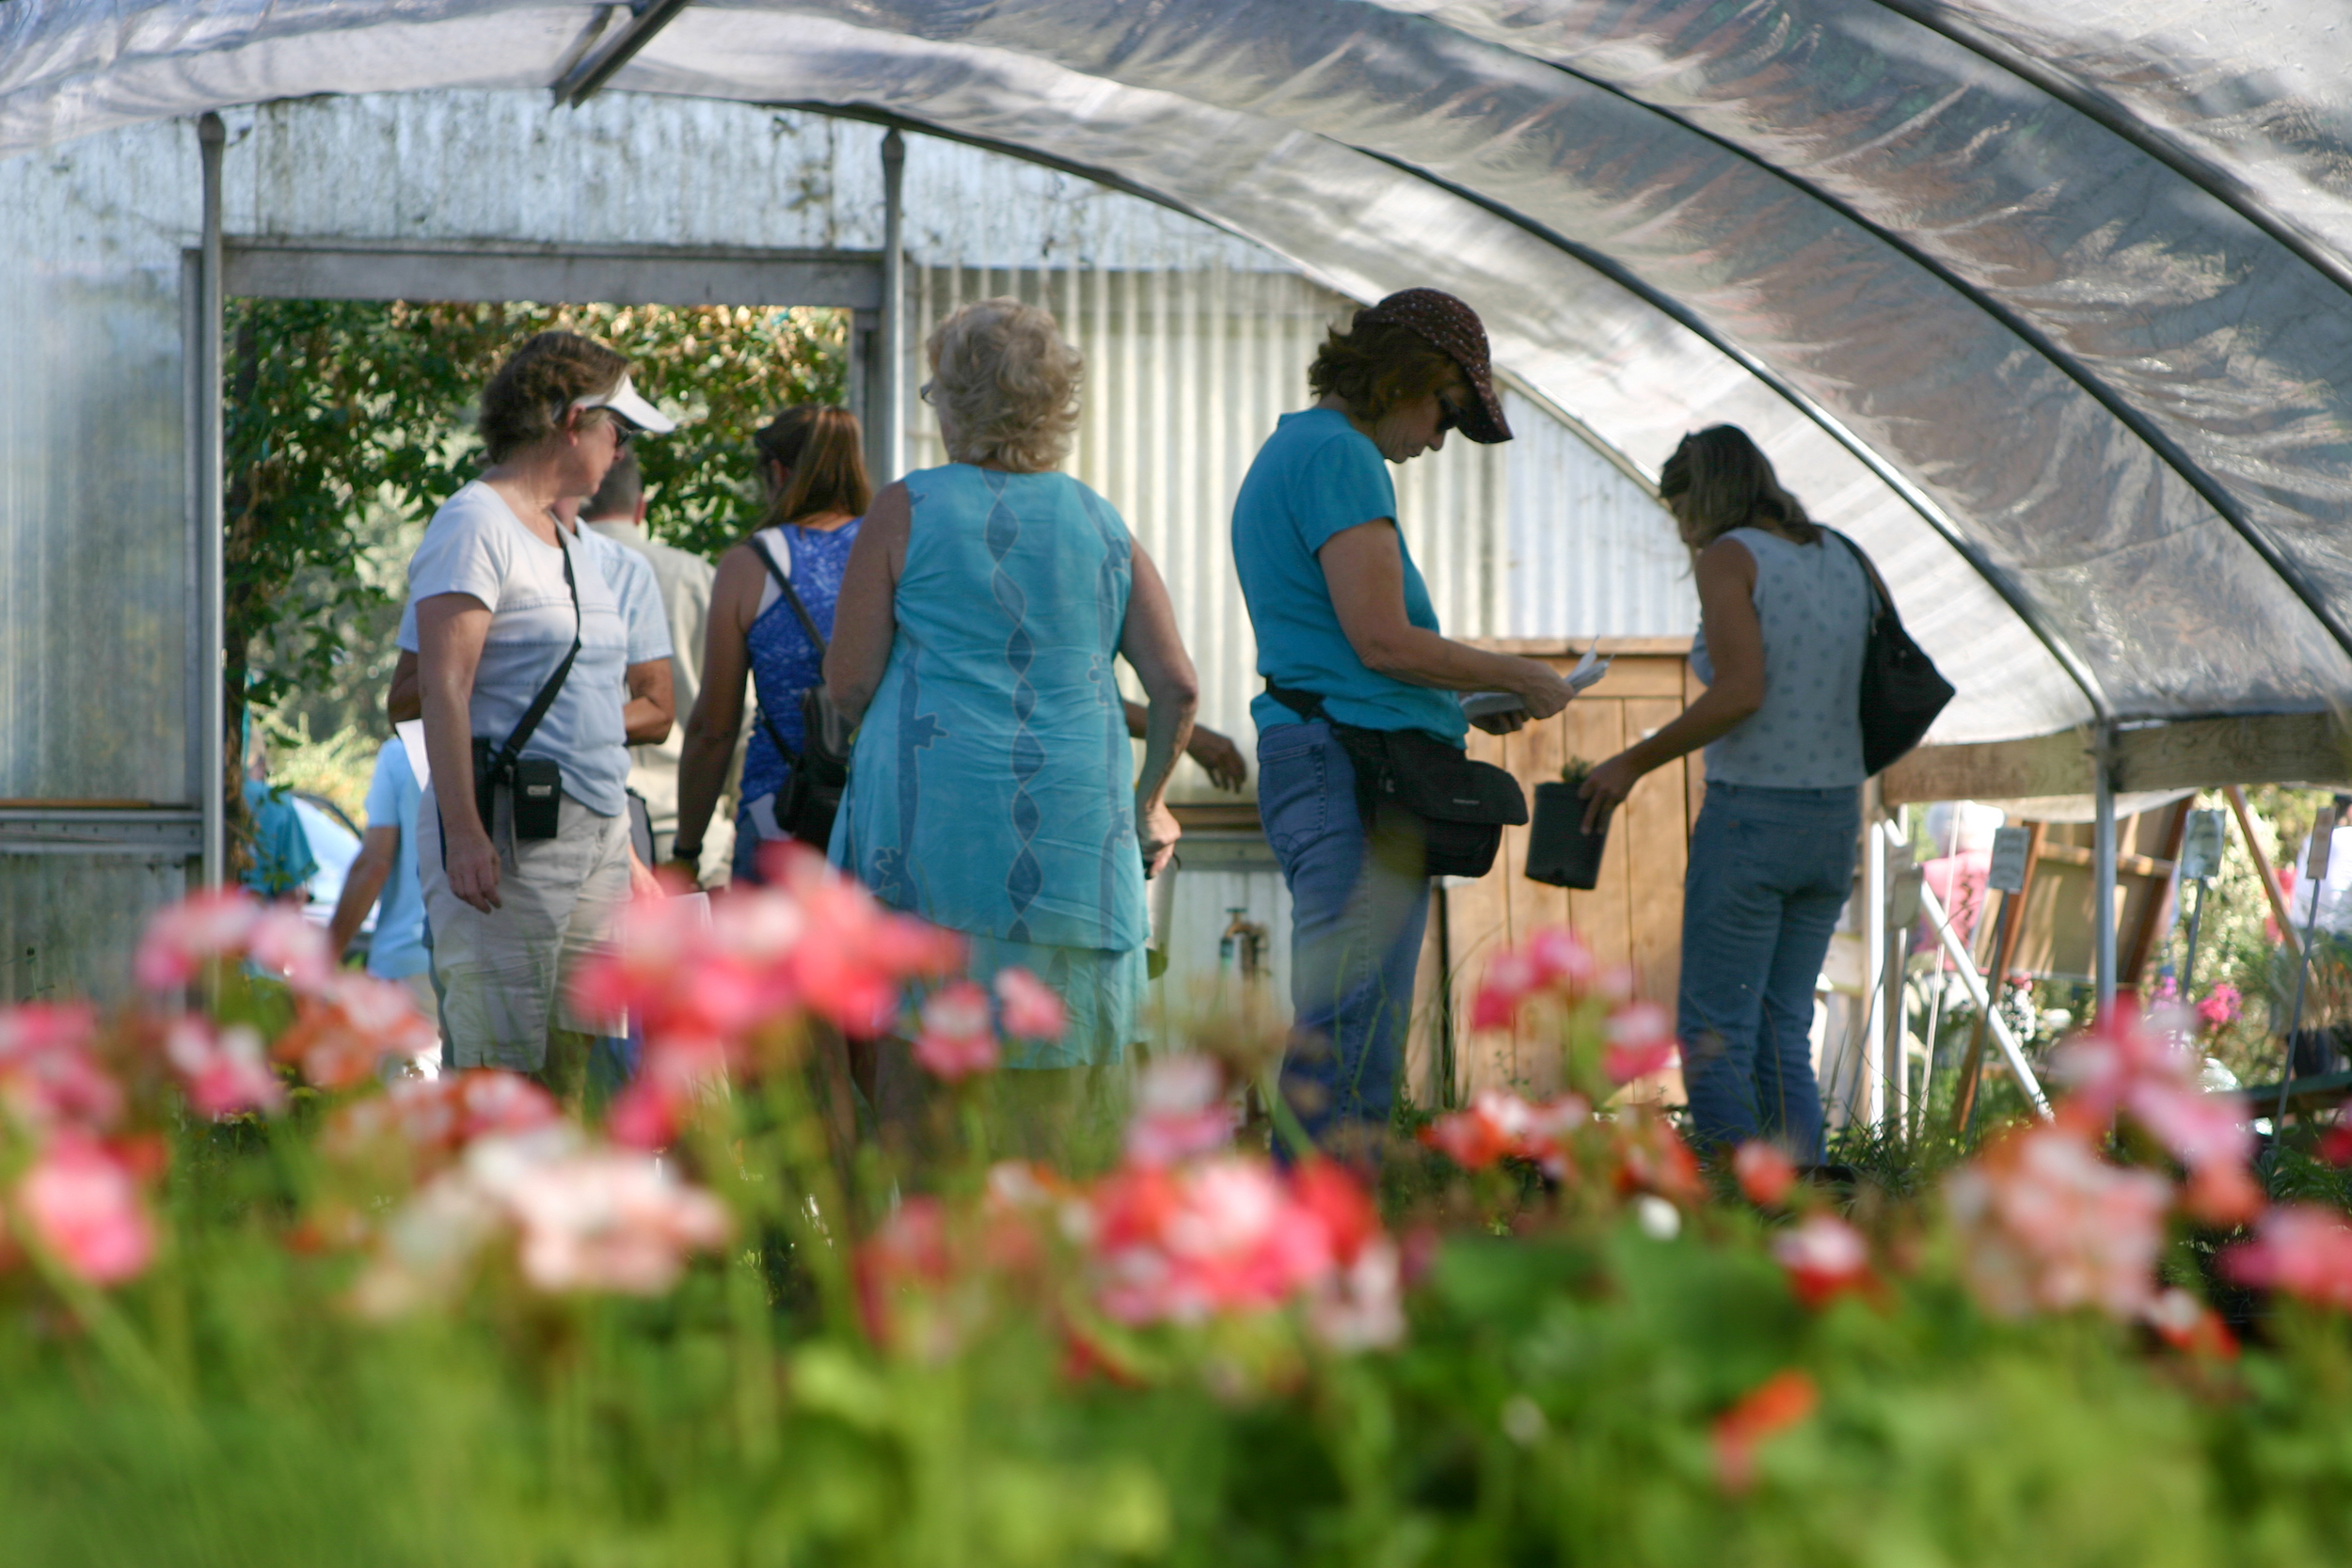 The public browses greenhouse filled with products grown through the Jail Industry Program.